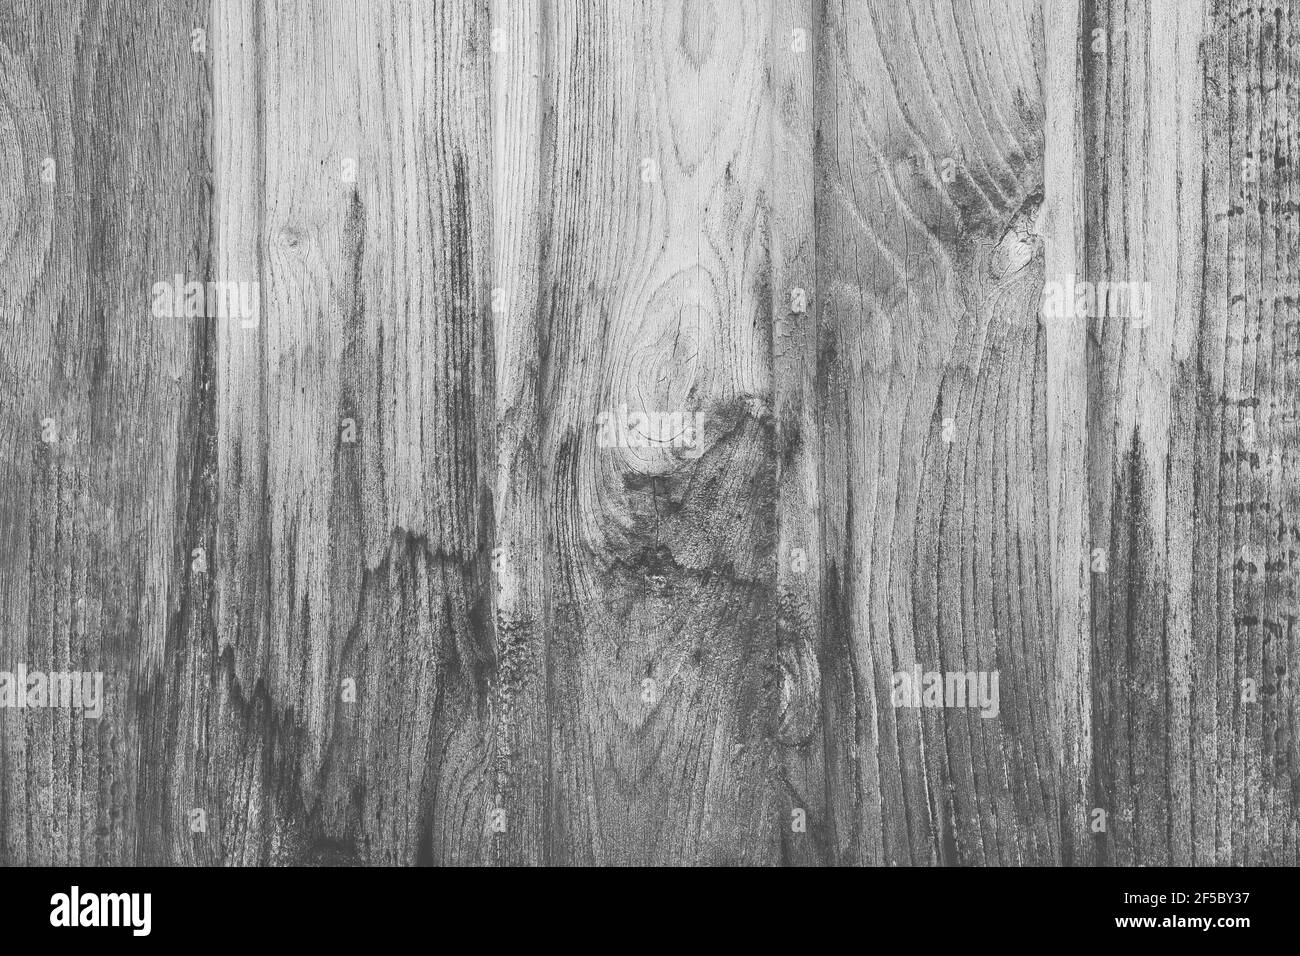 Texture of gray old boards with abstract pattern, wooden fence background. Stock Photo